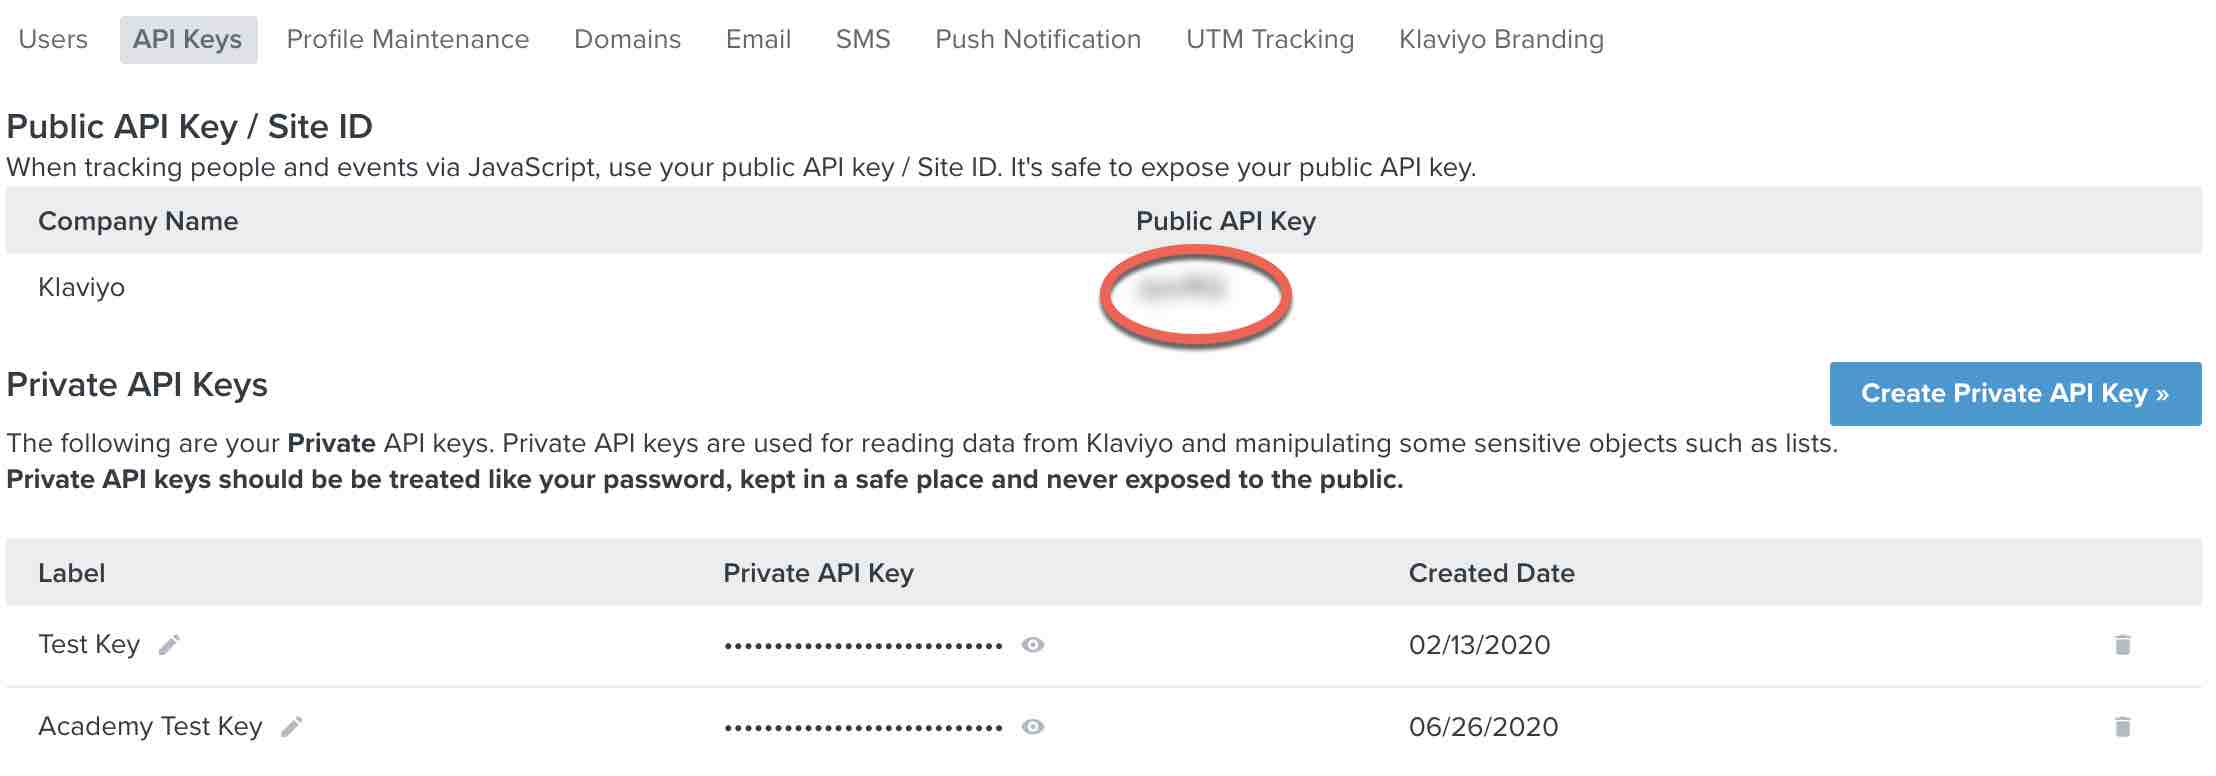 API Keys page in Klaviyo with public API key blurred and circled in red